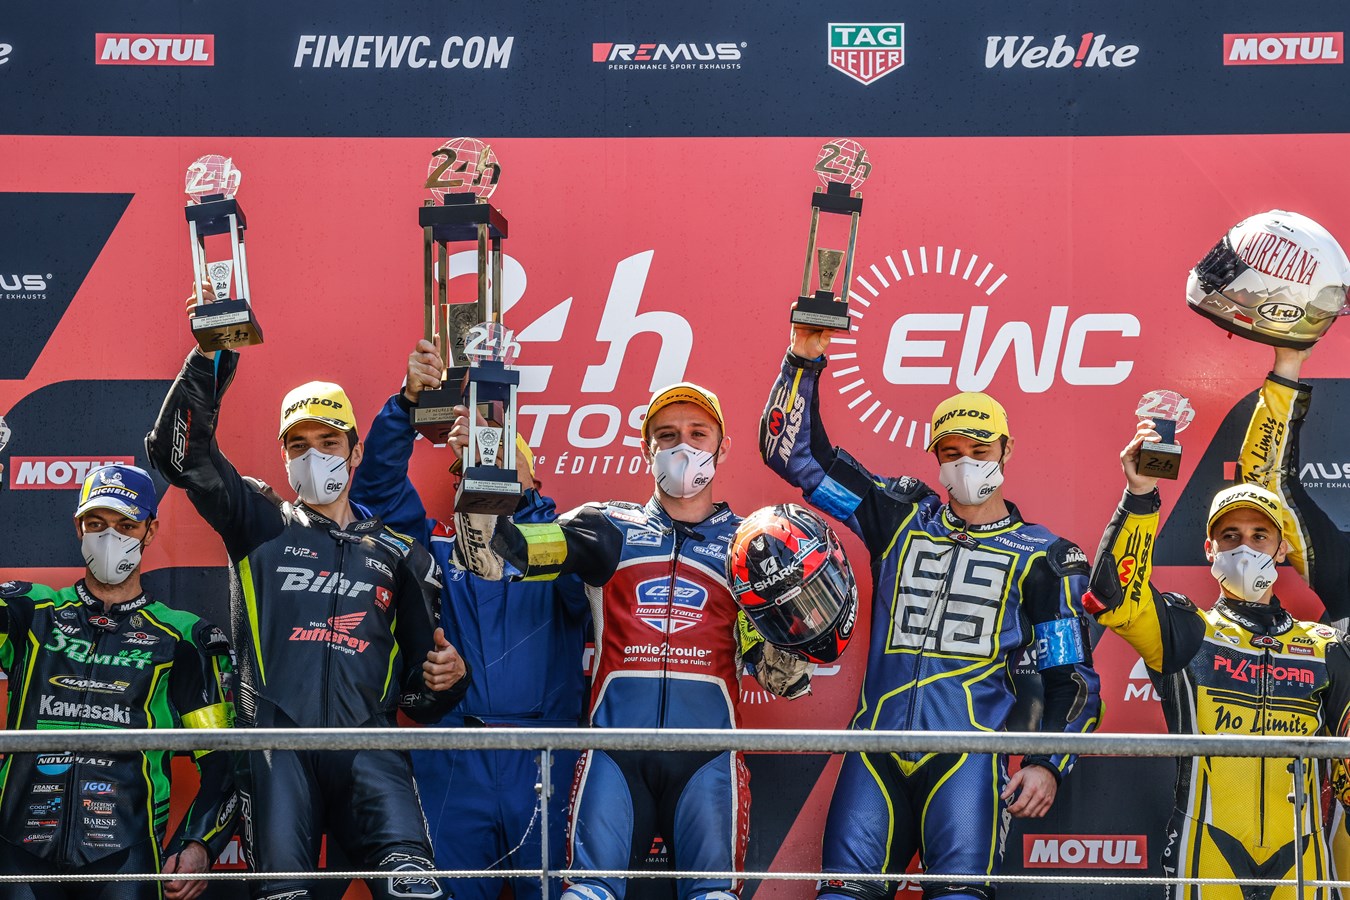 National Motos take incredible victory in STK at the 24h Motos at Le Mans whilst F.C.C. TSR Honda France denied the chance to continue their podium fight